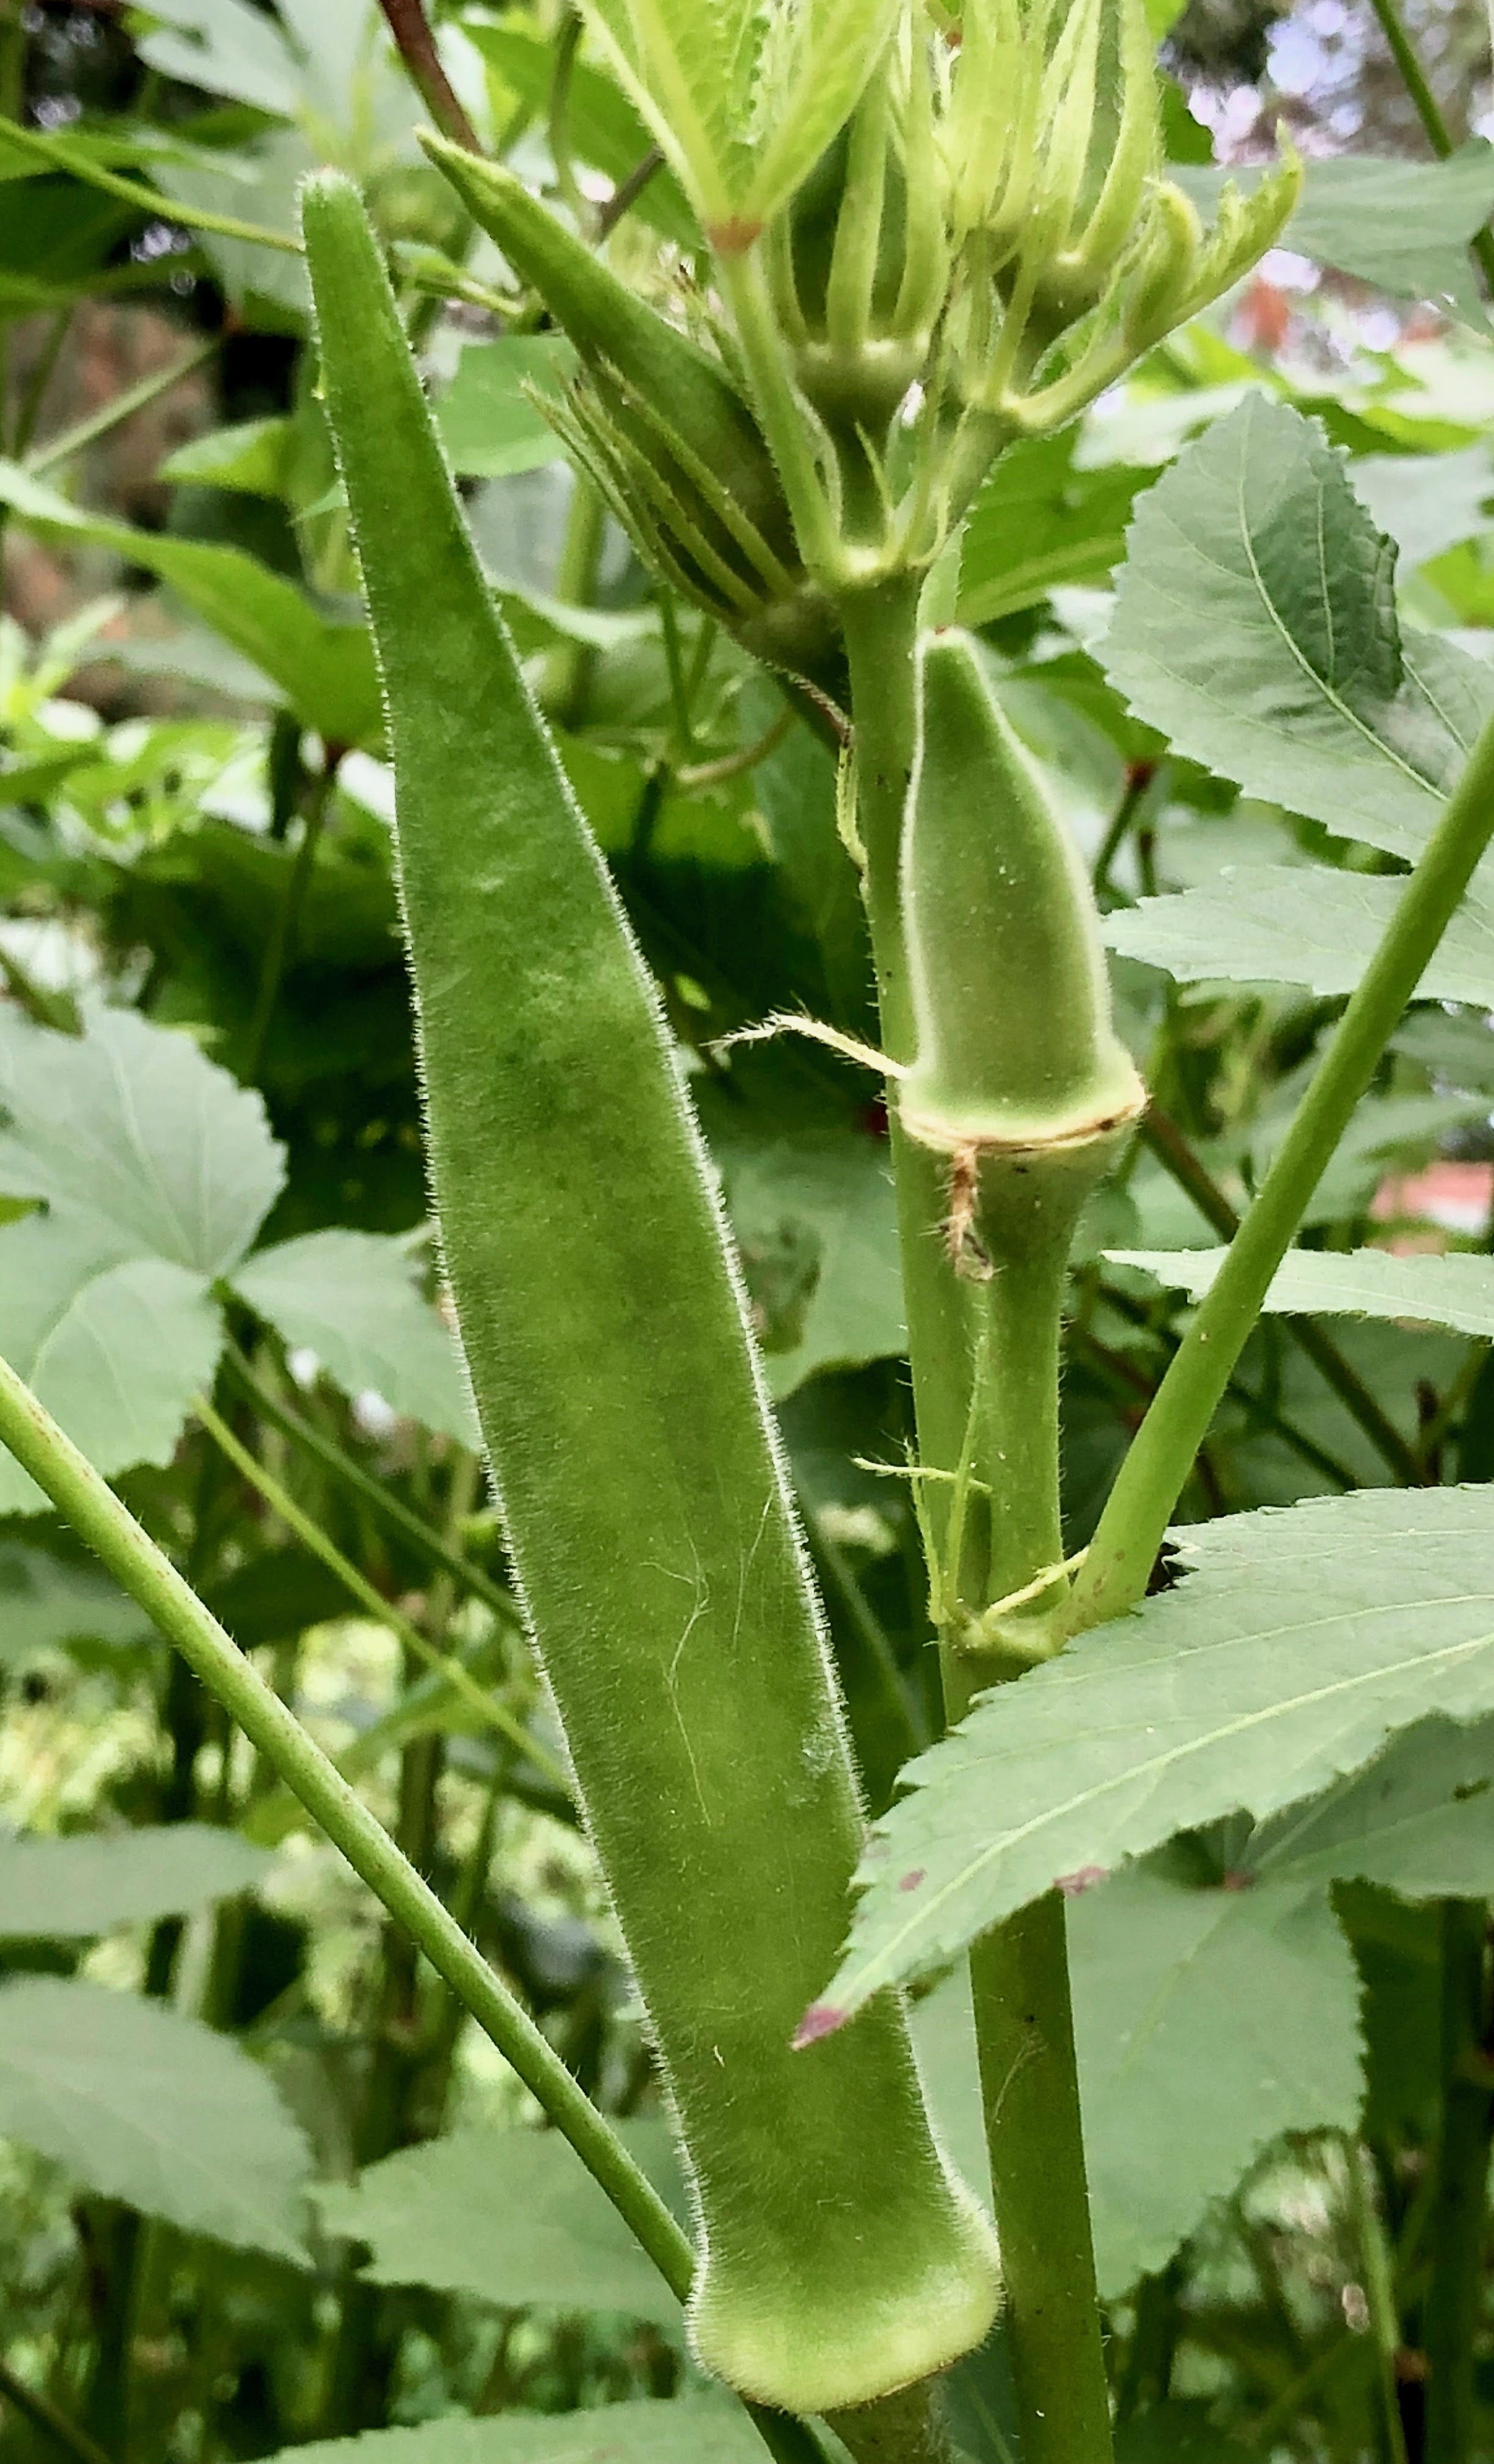 Roger Mercer: Okra plants are thriving in rain, humidity